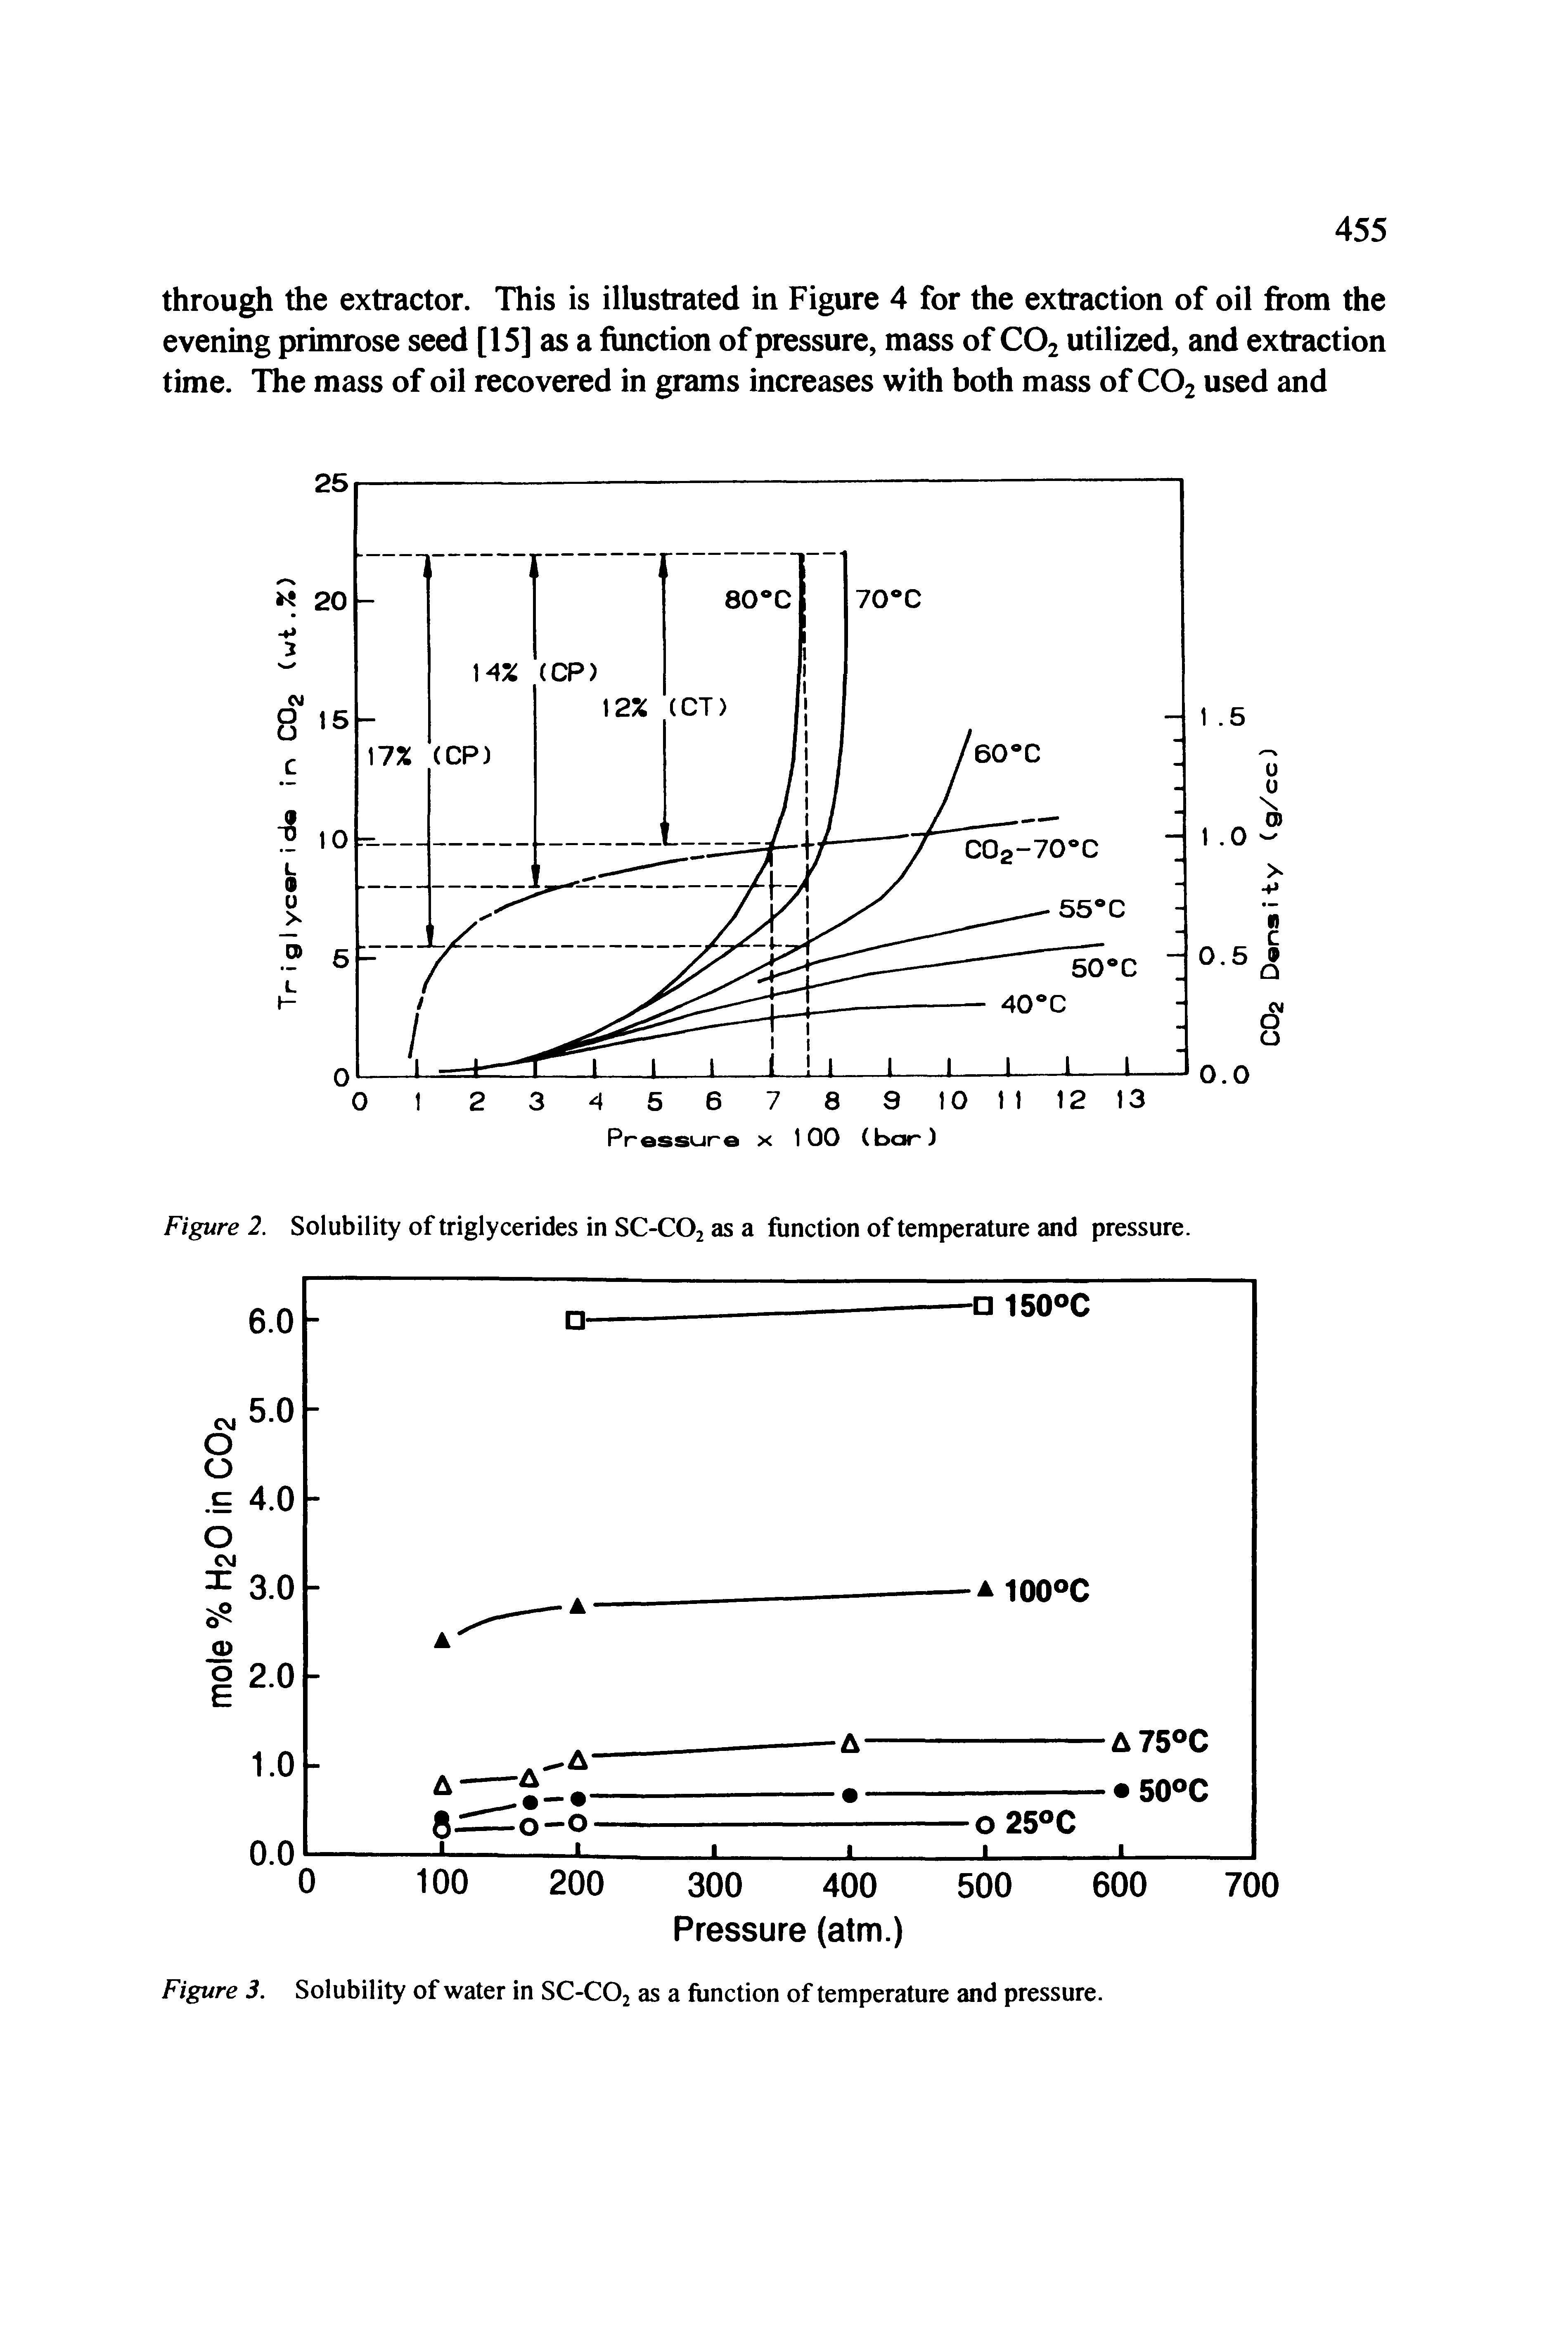 Figure 2. Solubility of triglycerides in SC-CO2 as a function of temperature and pressure.